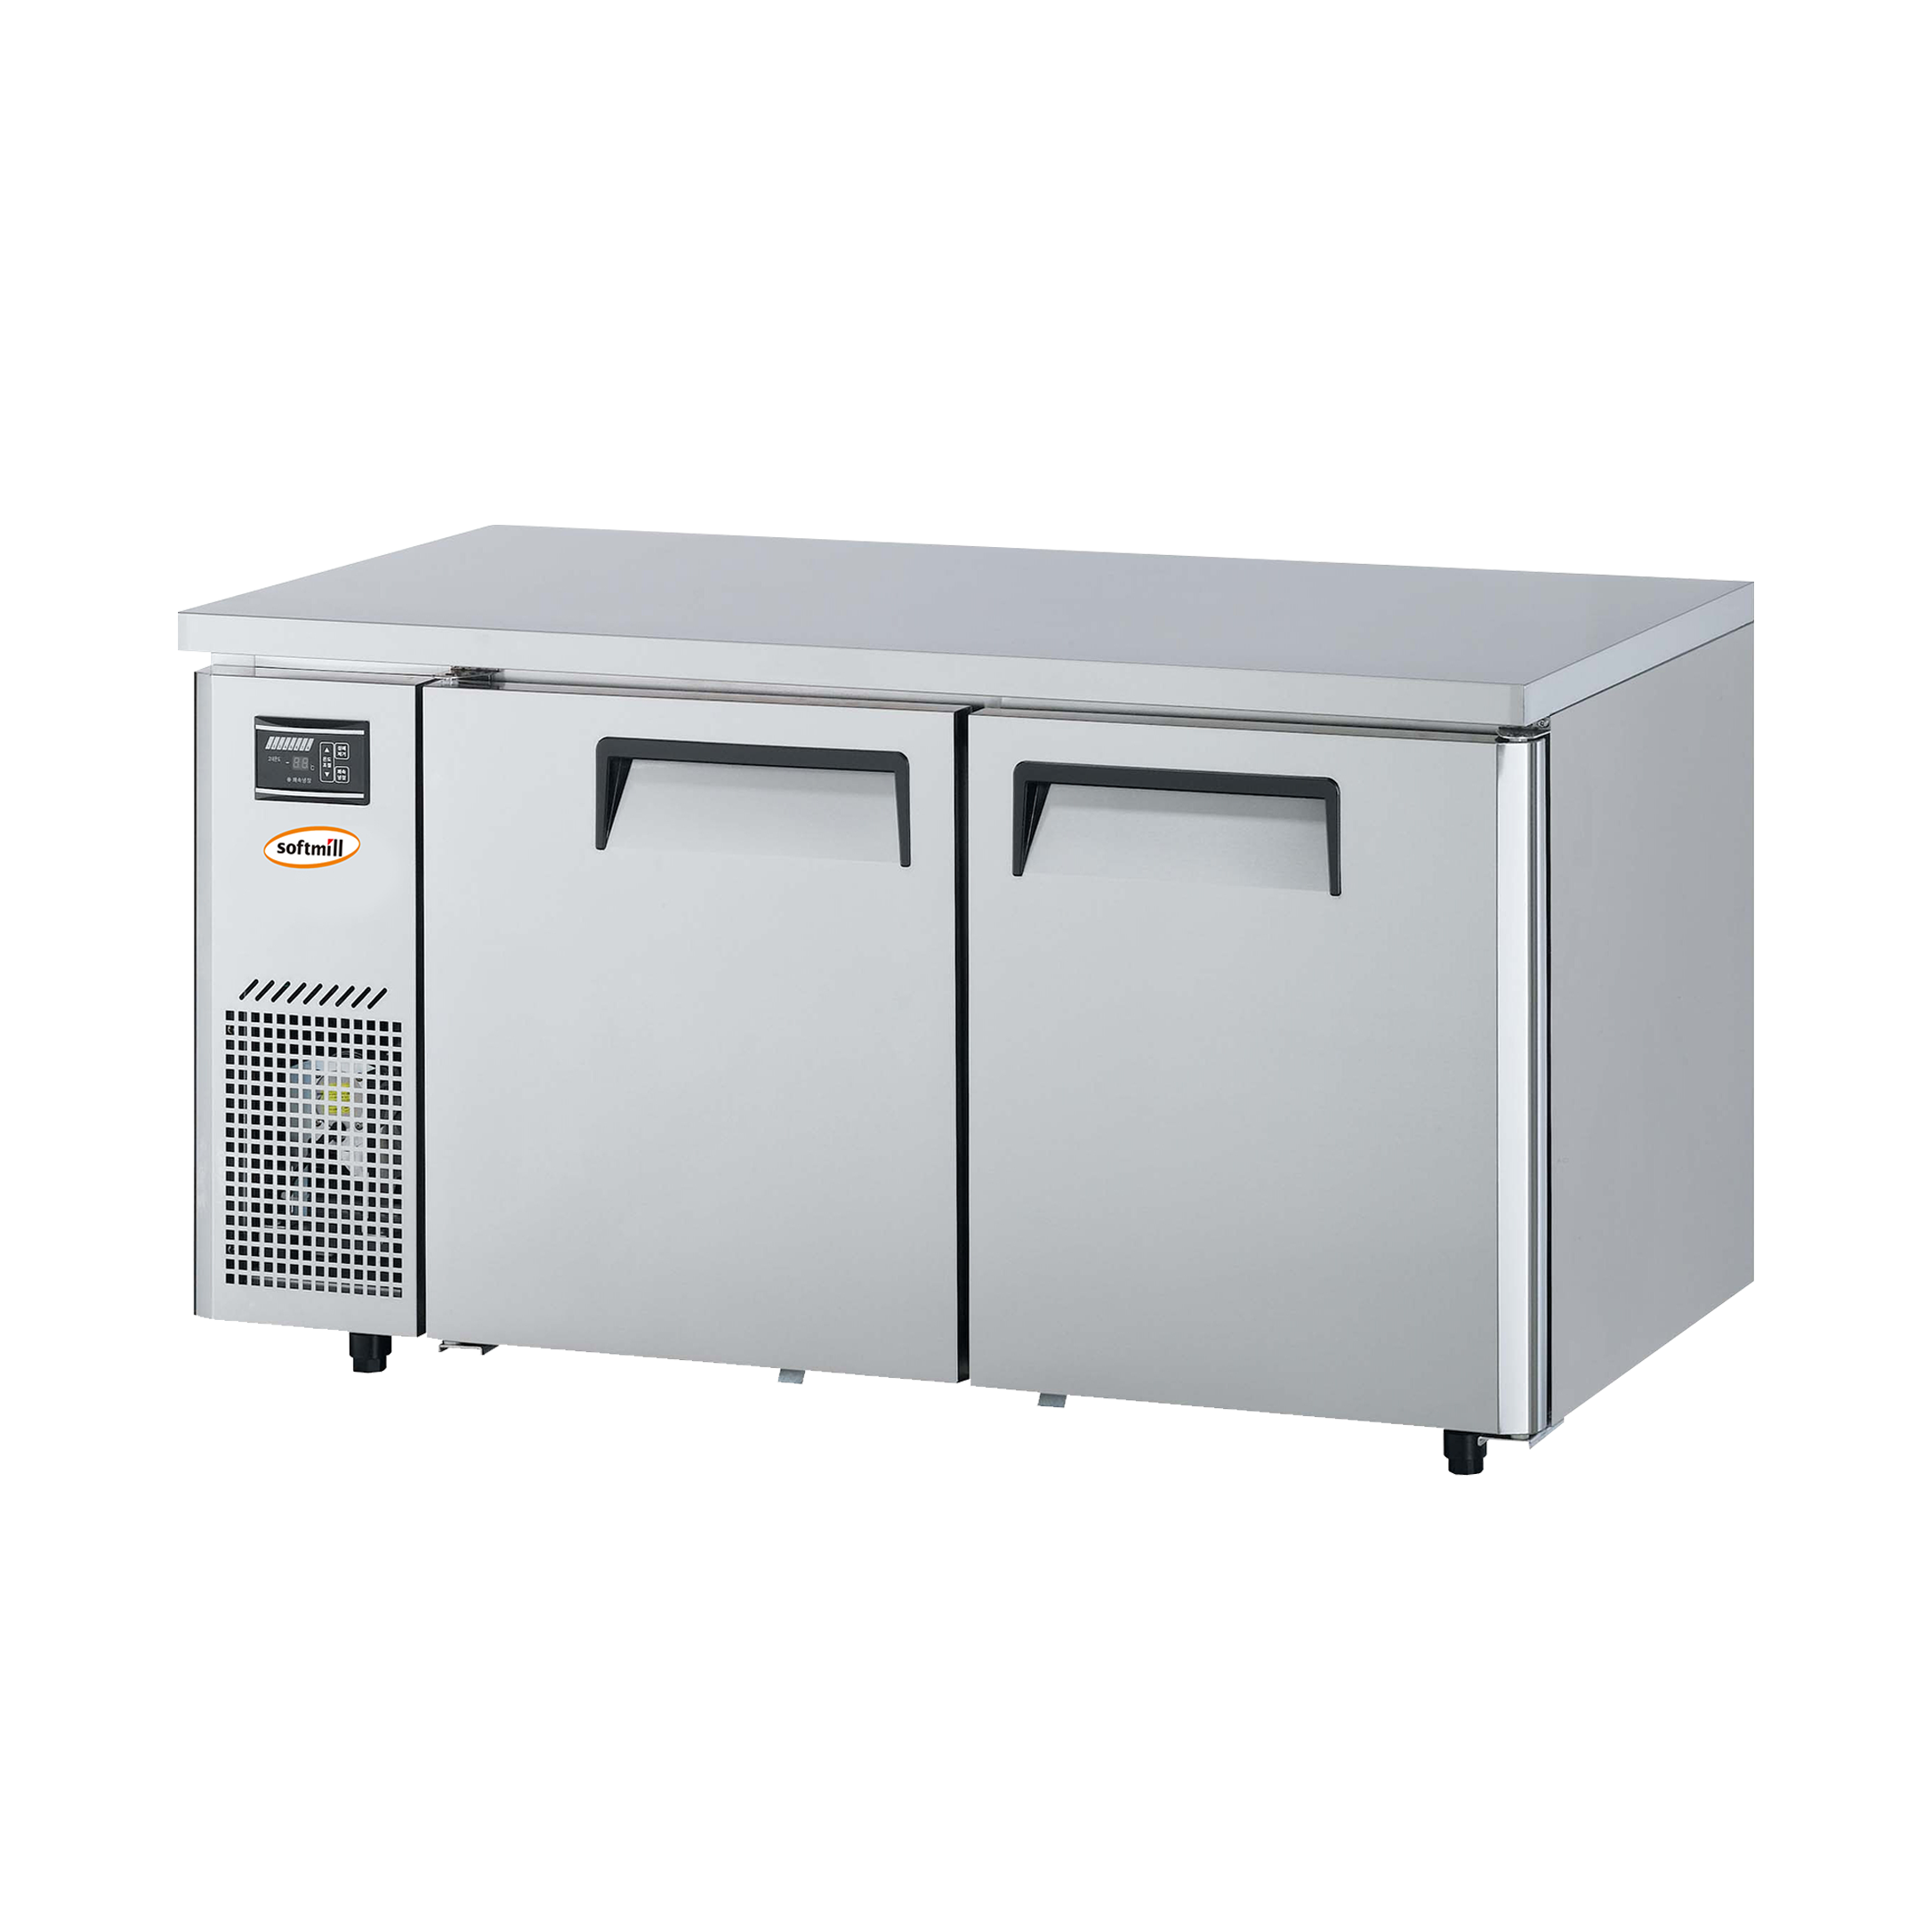 Table type refrigerator size up images